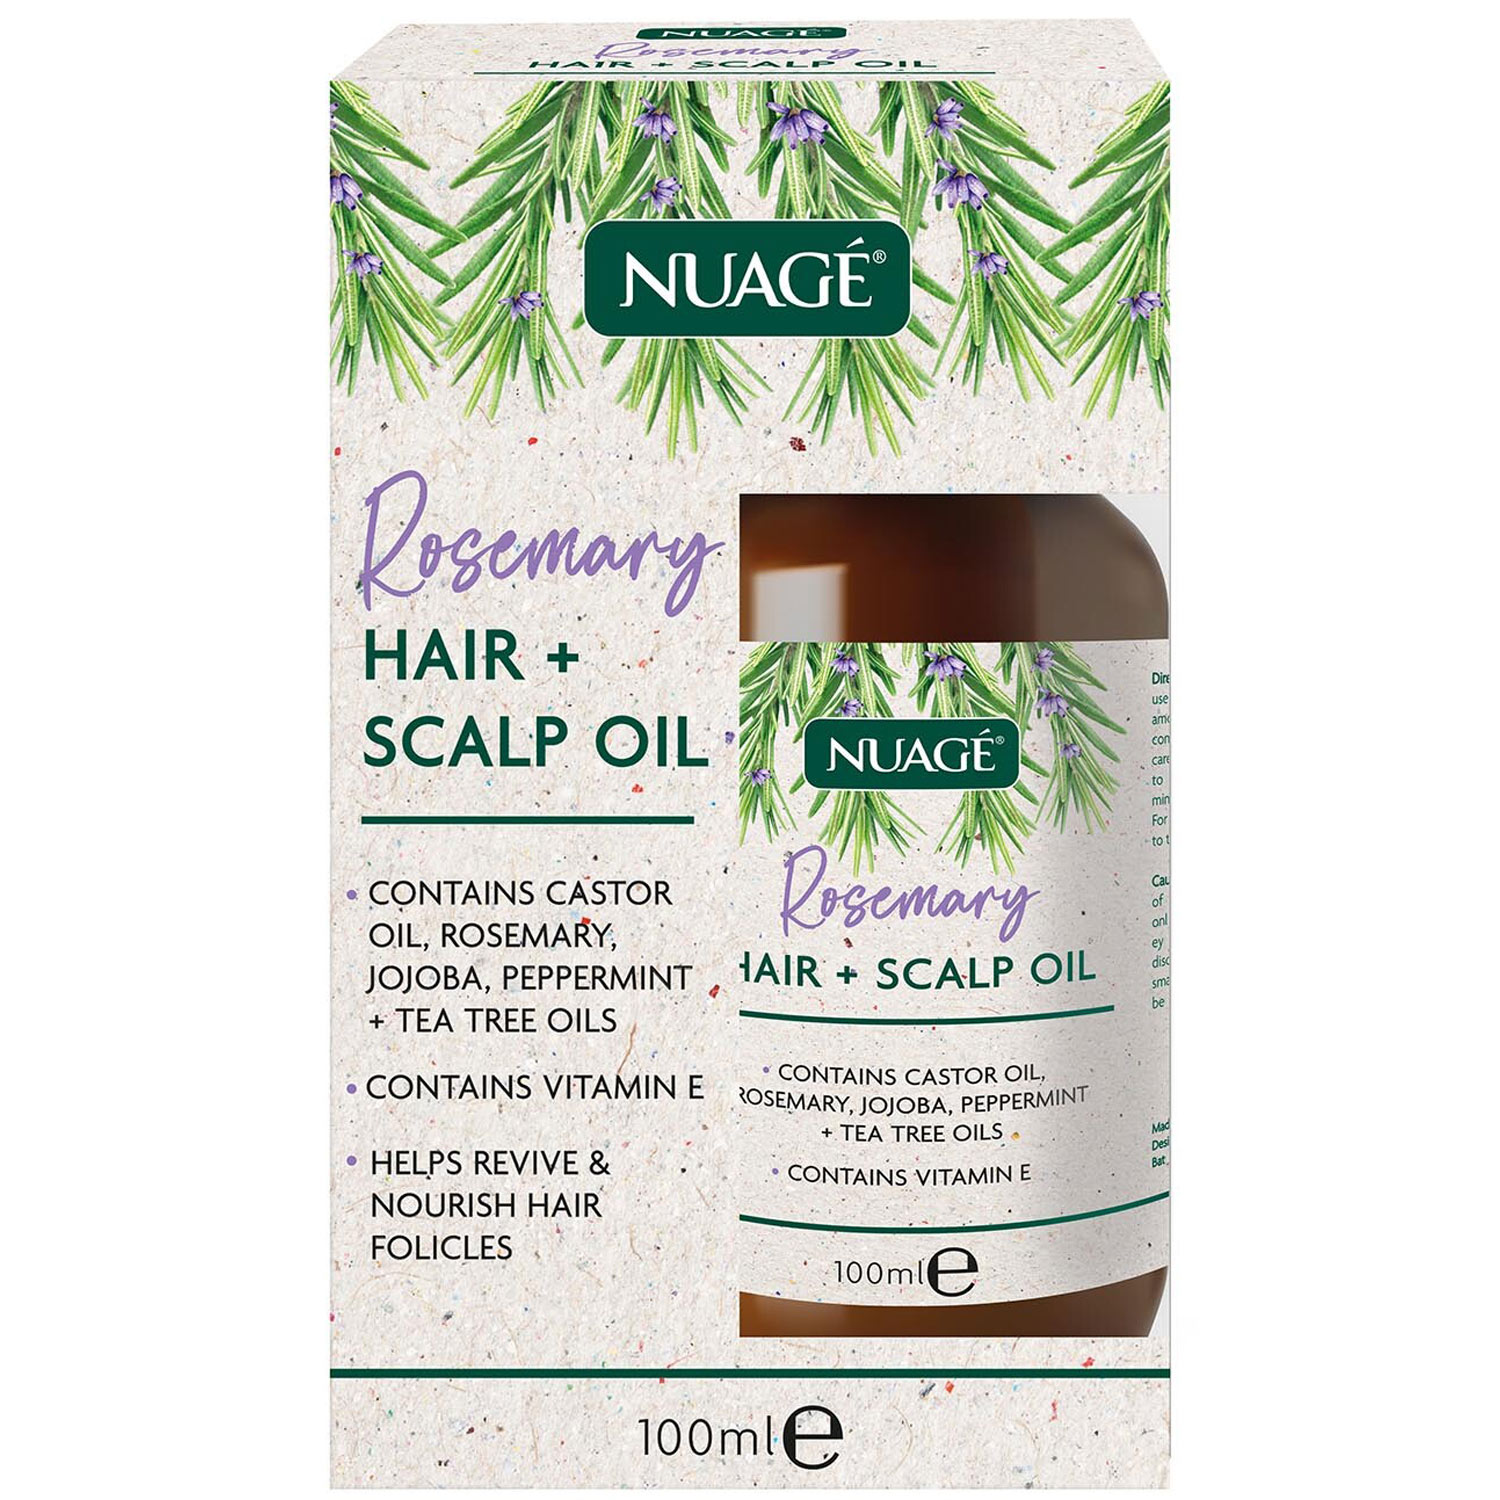 Nuage Rosemary Hair and Scalp Oil - Natural Image